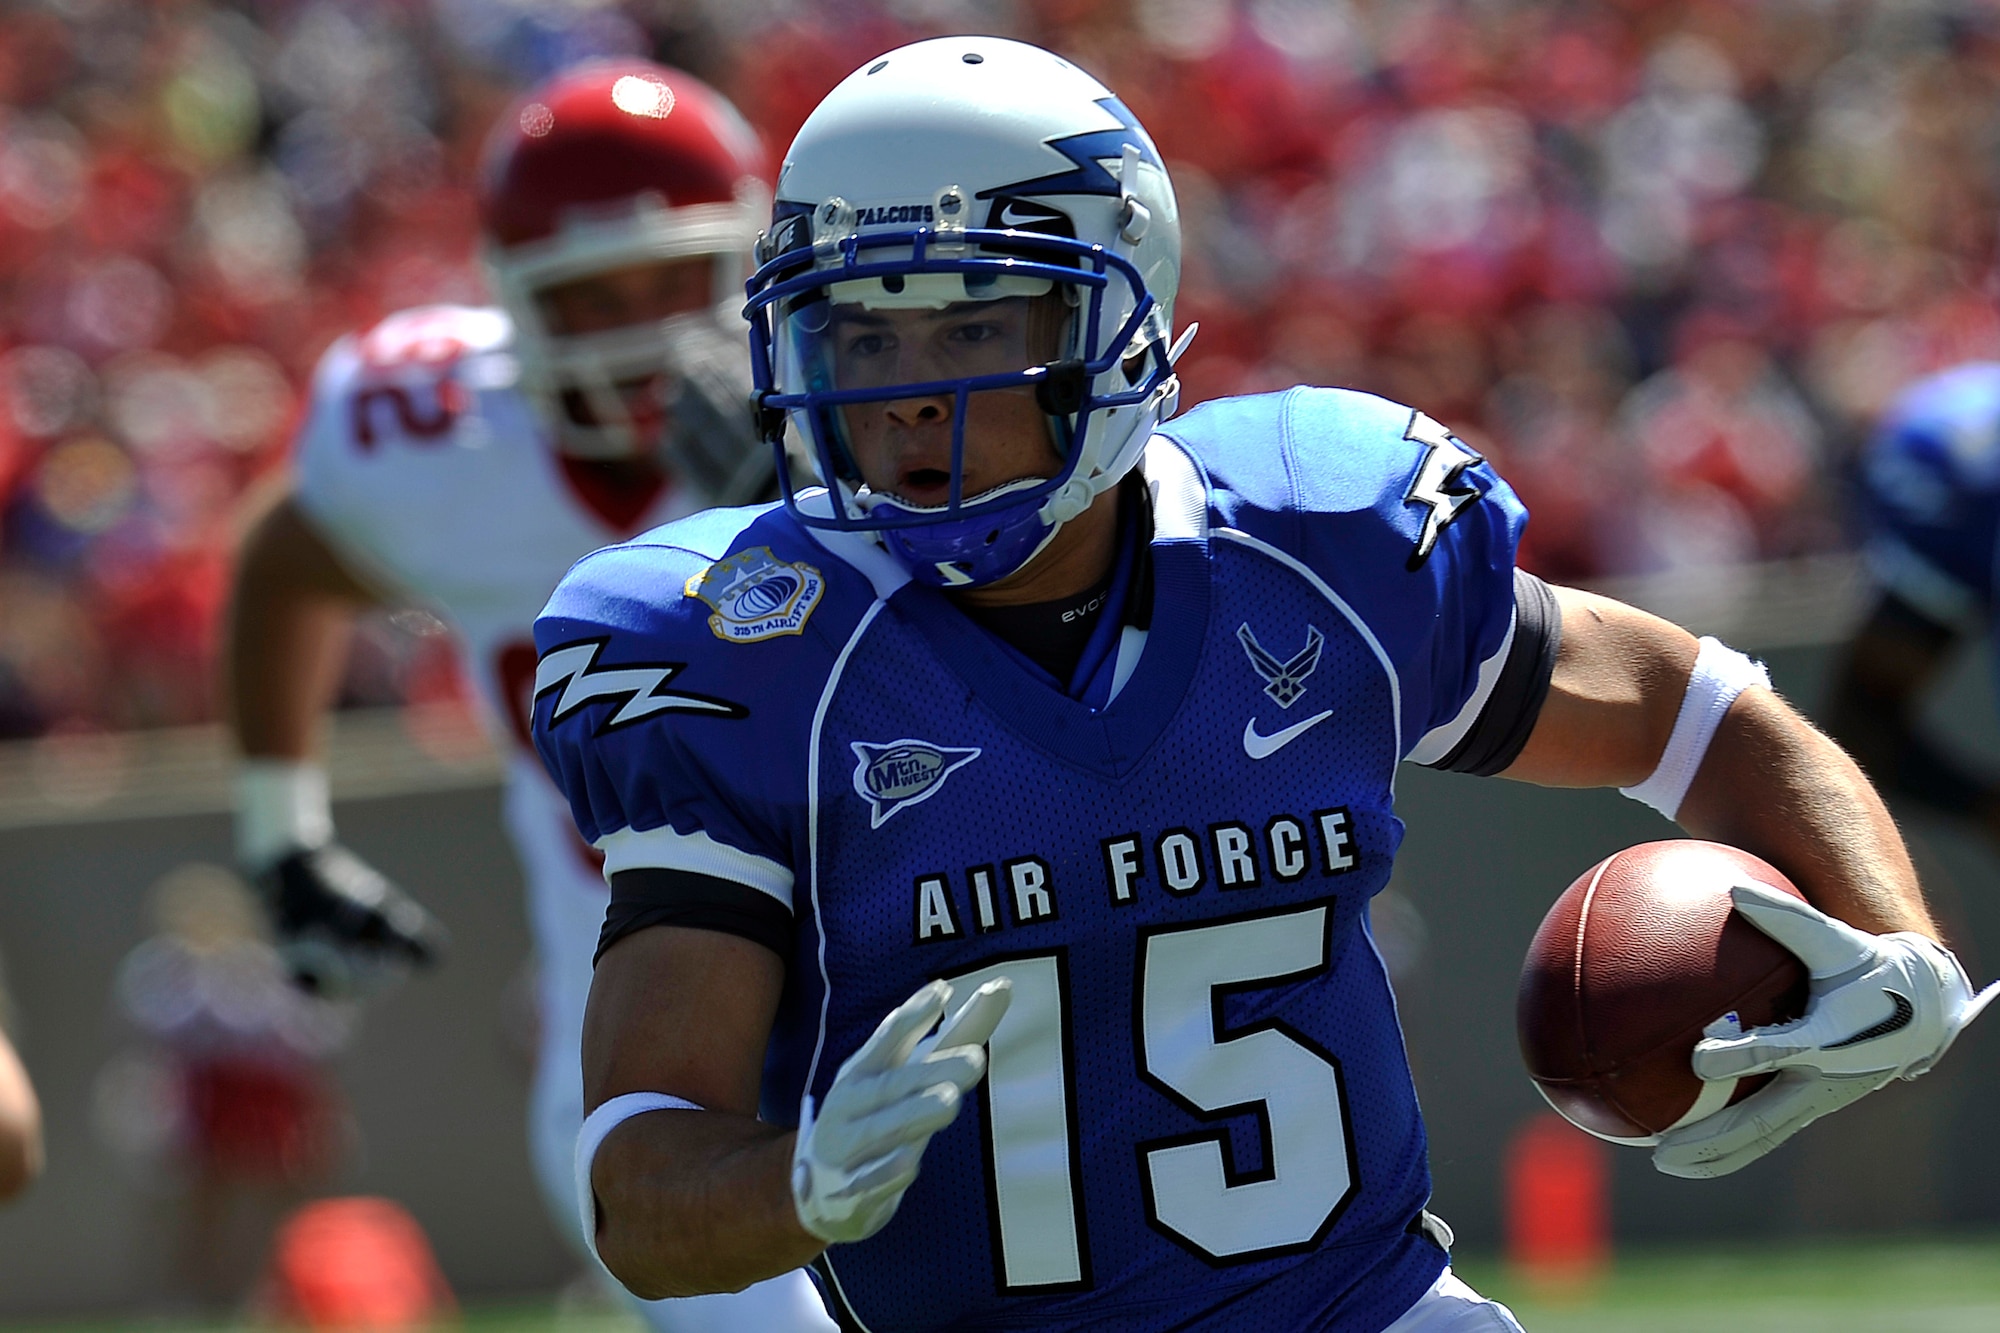 Air Force wide receiver Jonathan Warzeka breaks into the open field during the Falcons' game versus South Dakota at Falcon Stadium Sept. 3, 2011. Warzeka, a native of Lake Elsinore, Calif., had one reception for 22 yards and one rush for 9 yards. (U.S. Air Force photo/Raymond McCoy)